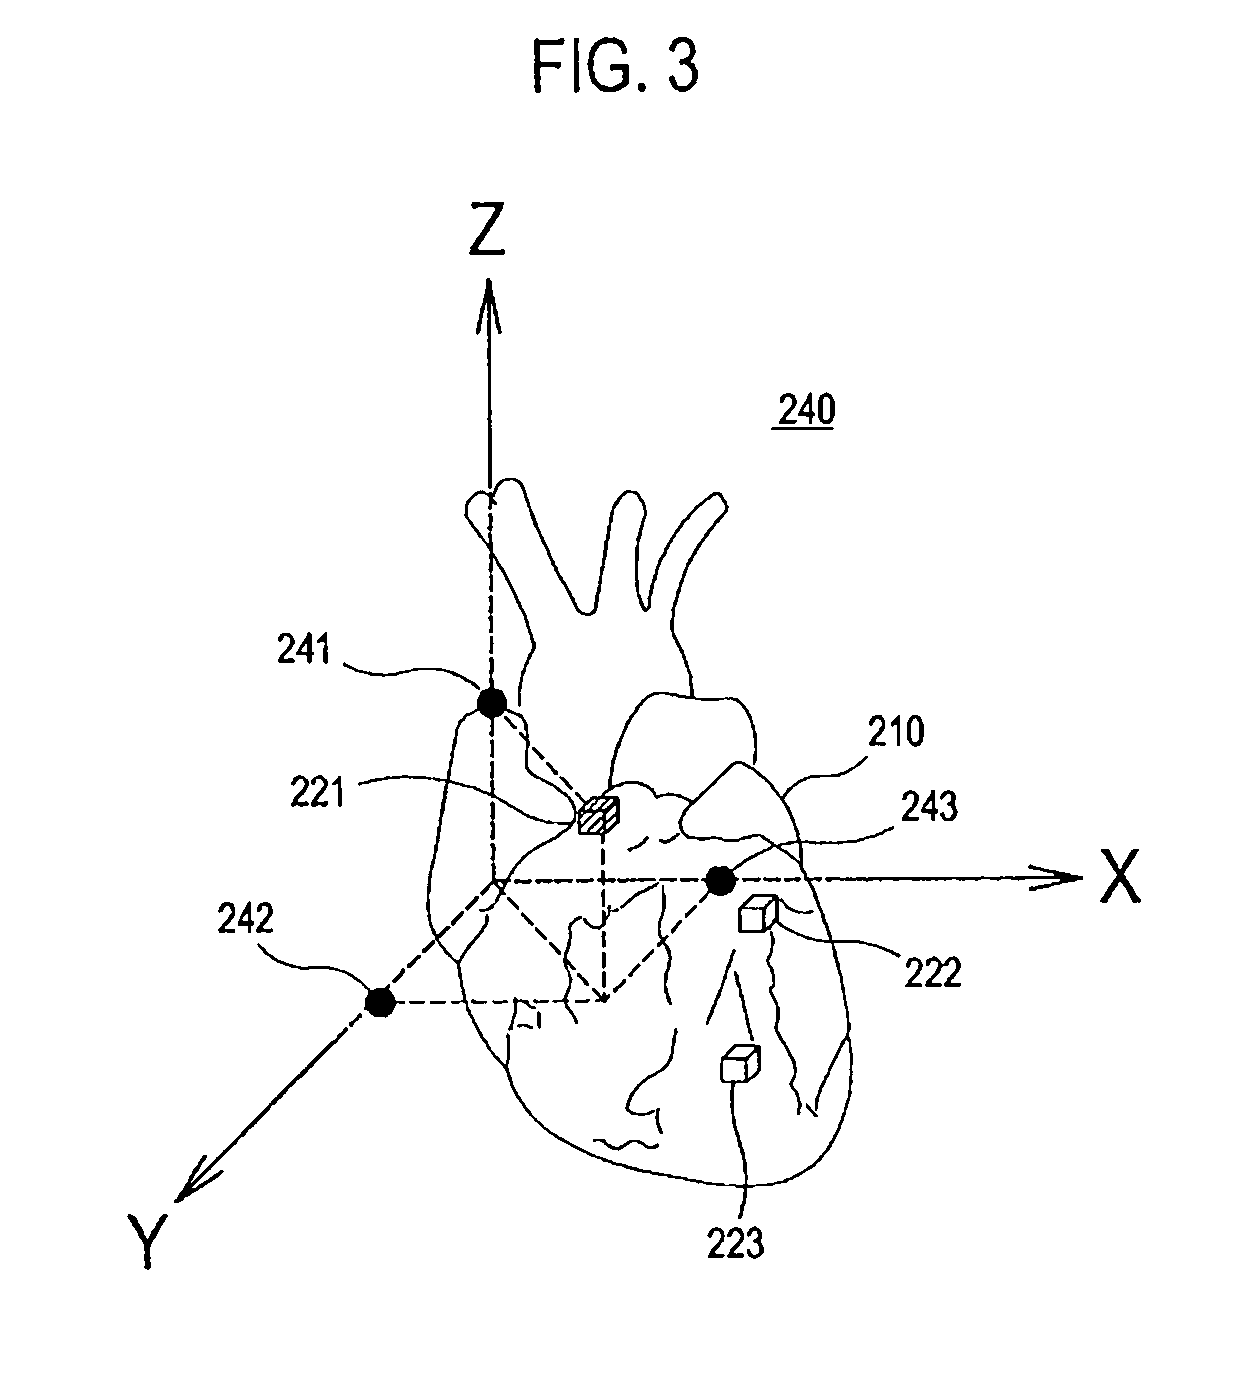 Ultrasound system and method of forming an ultrasound image